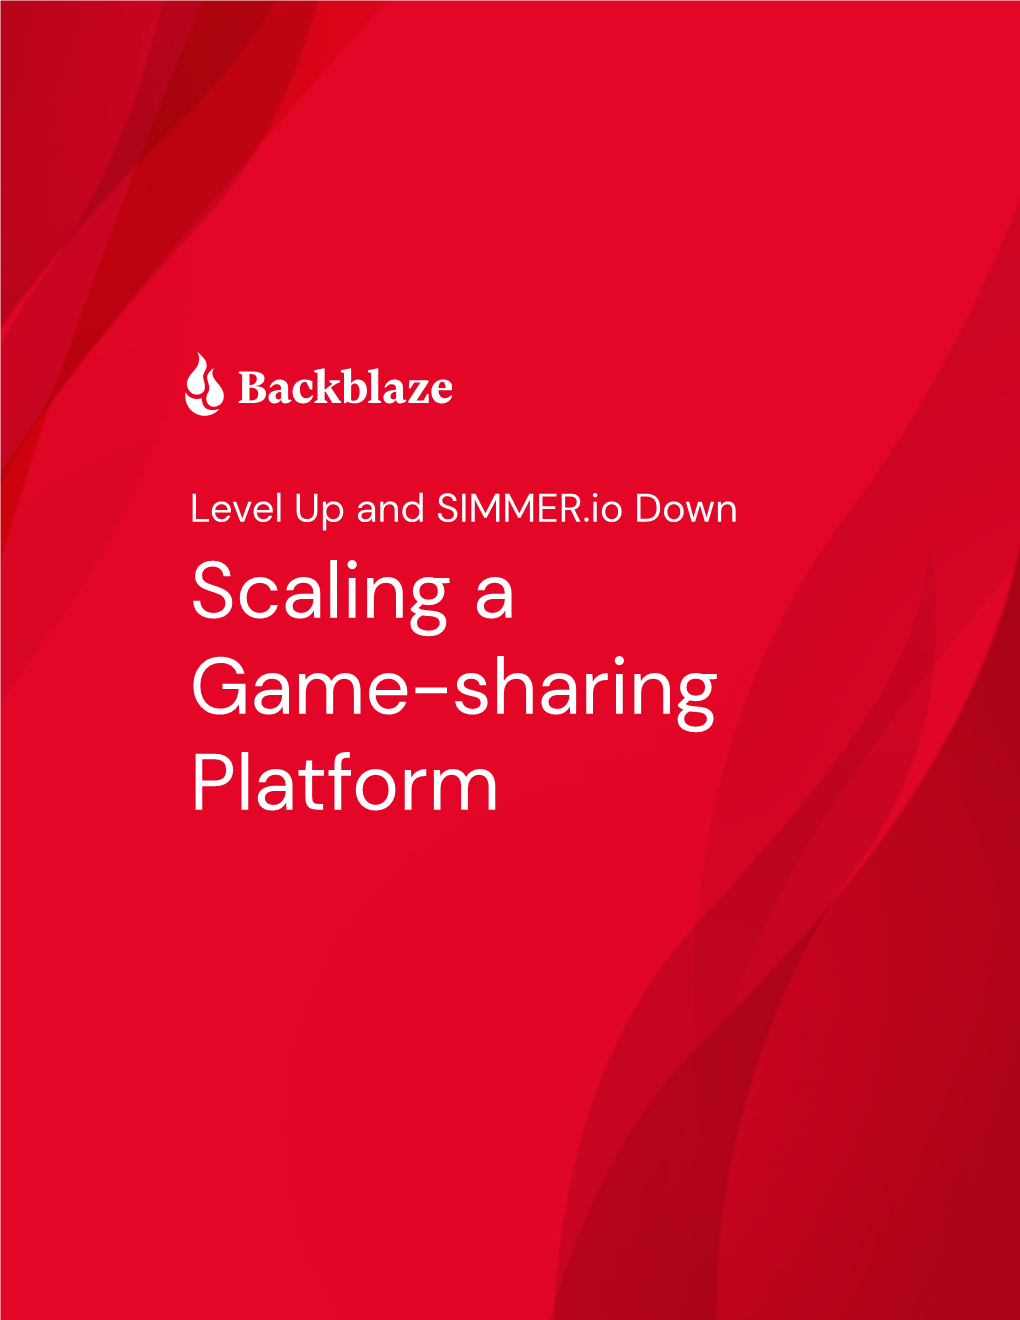 Scaling a Game-Sharing Platform Introduction